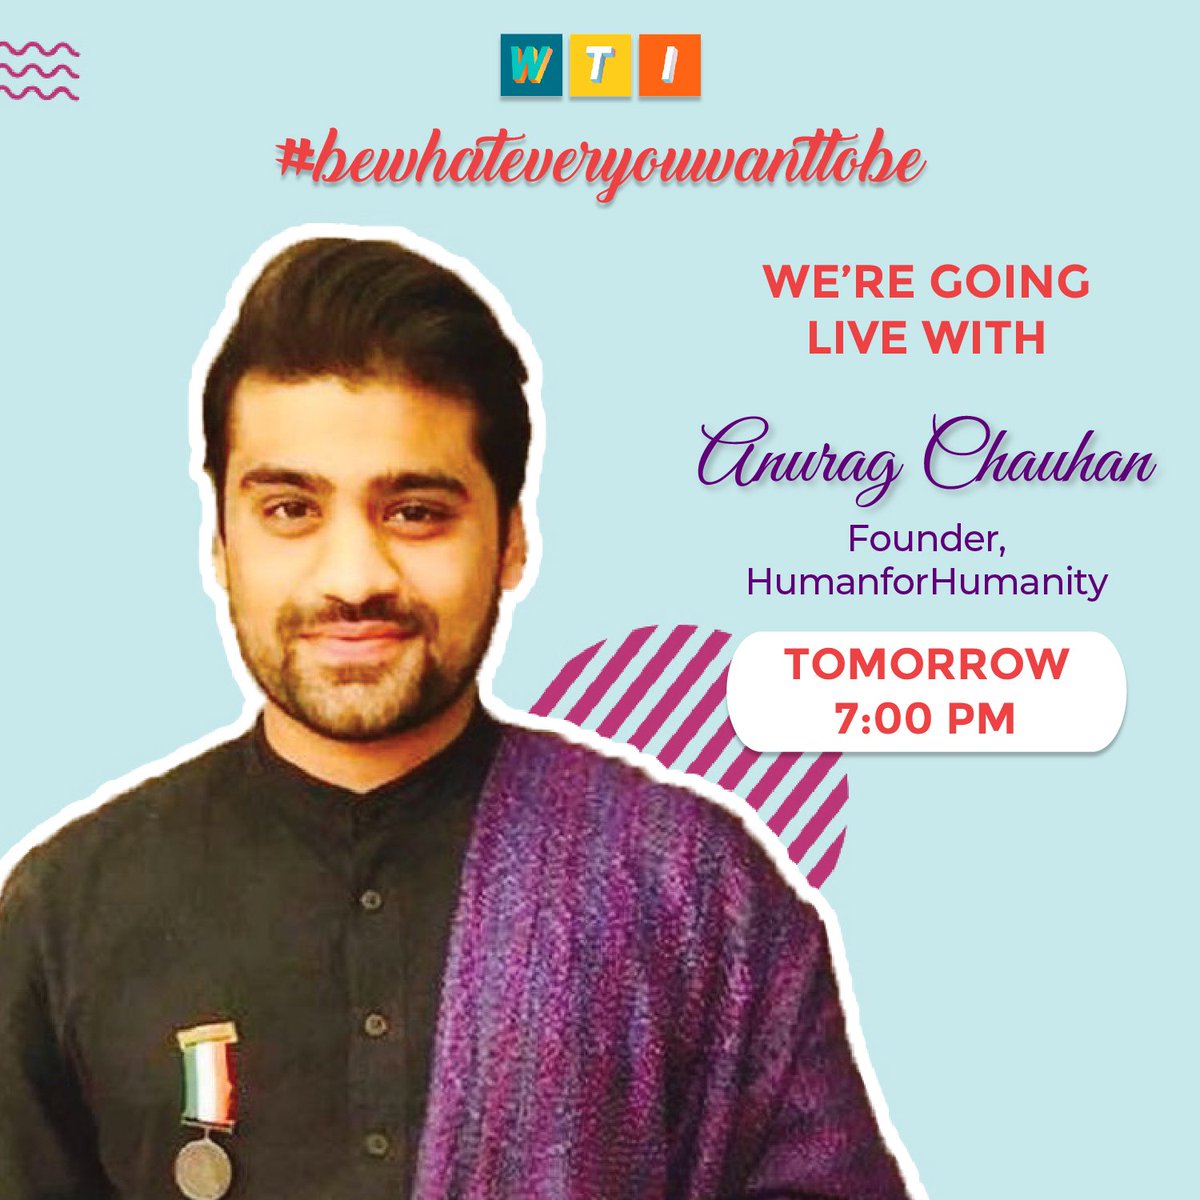 We are delighted to invite @anuragchauhanofficial , Founder of Humans for Humanity for a live session with us today, at 7:00pm.

#humansforhumanity #humansofindia #anuragchauhan #bewhateveryouwanttobe #wetheinfluencers